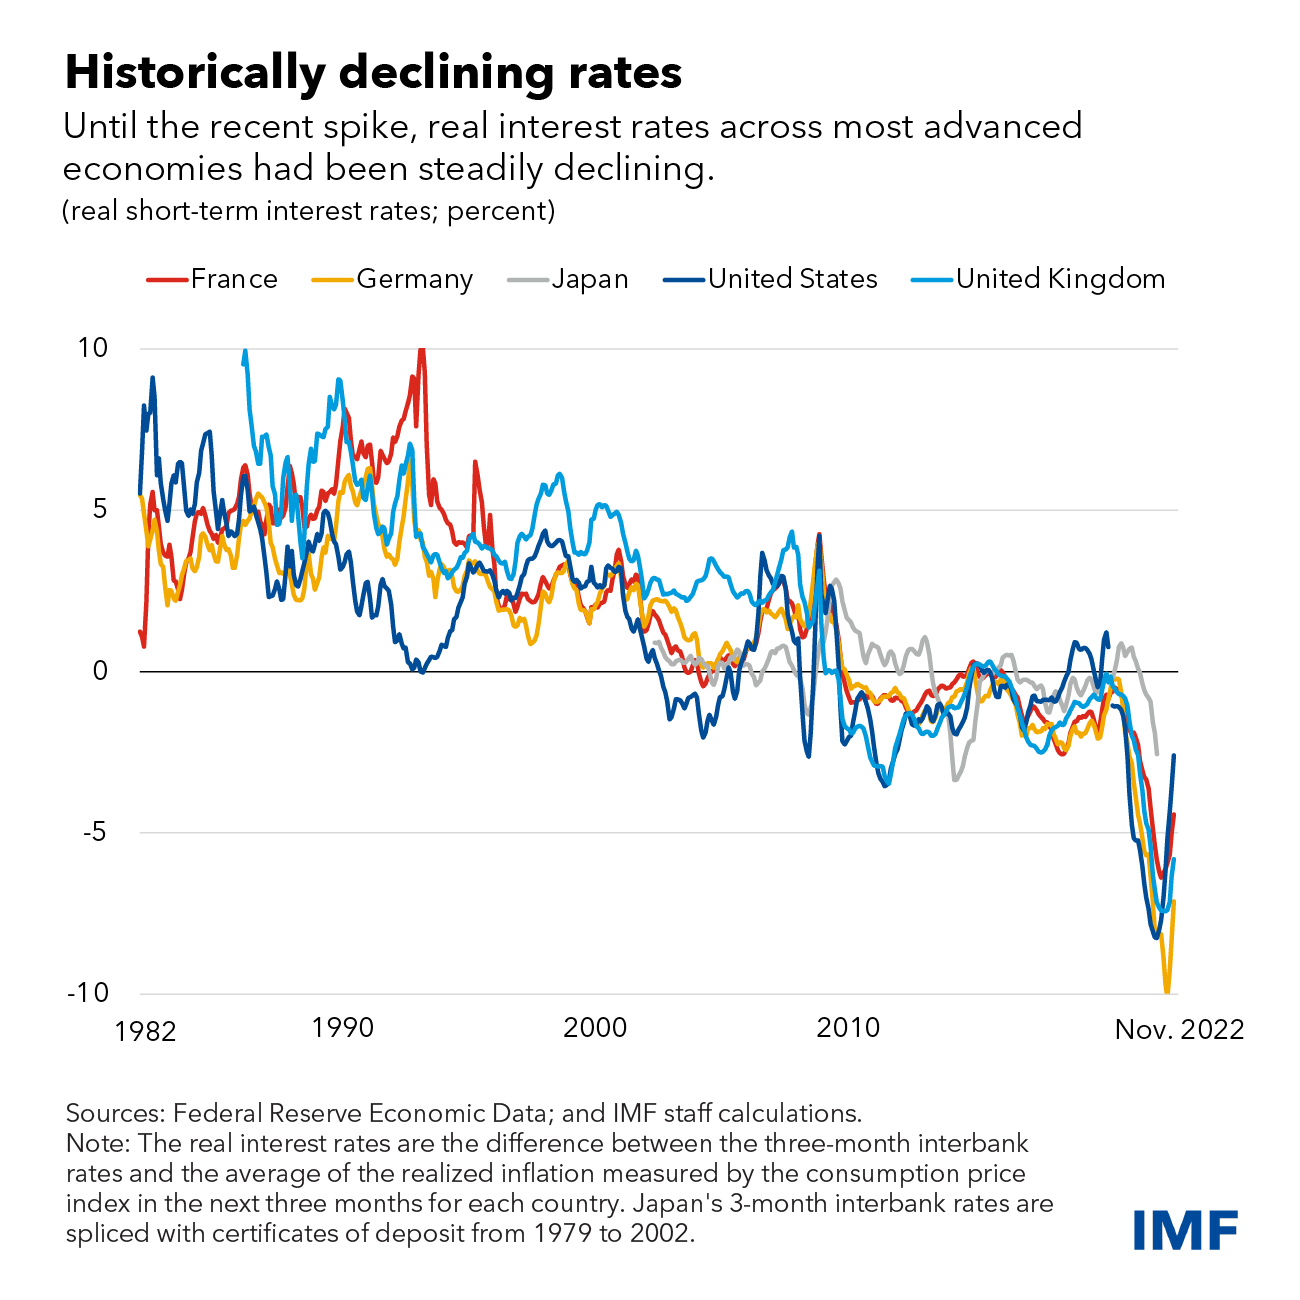 historical declining rates